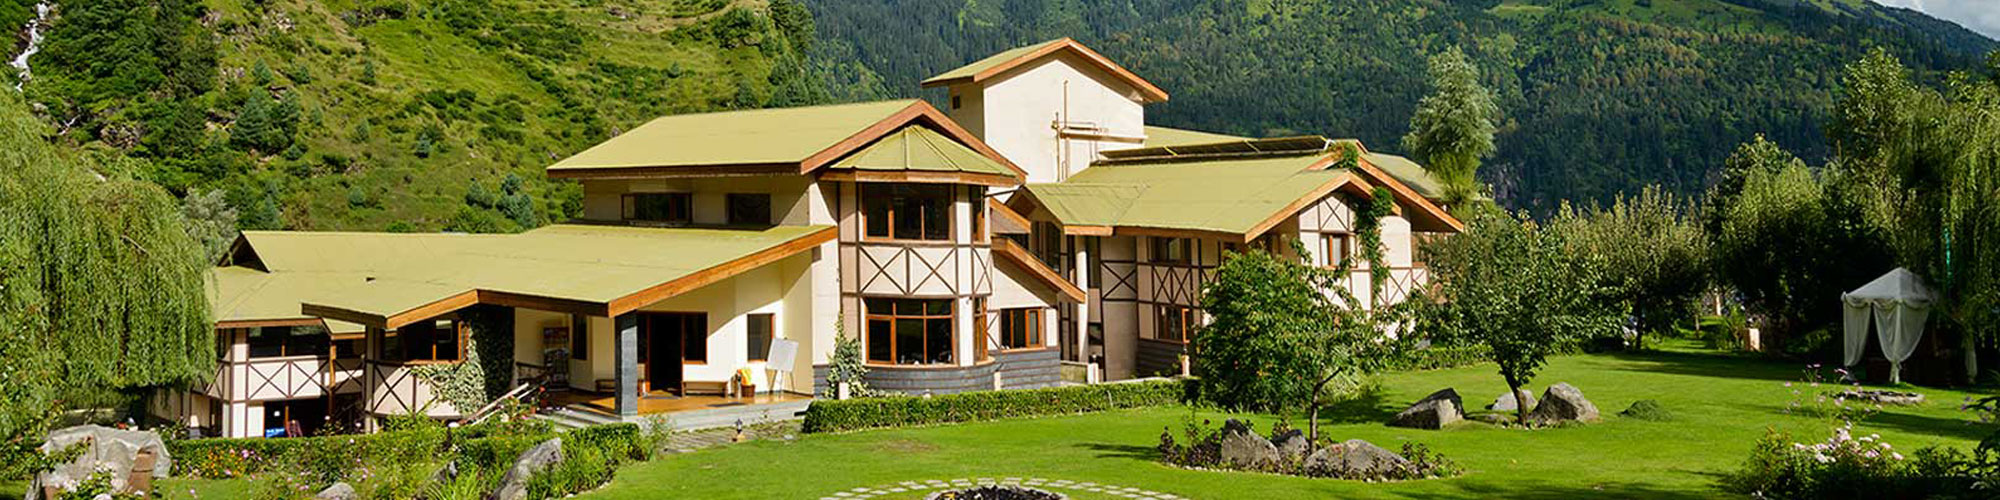 solang-valley Best Resorts, Manali, Hotels